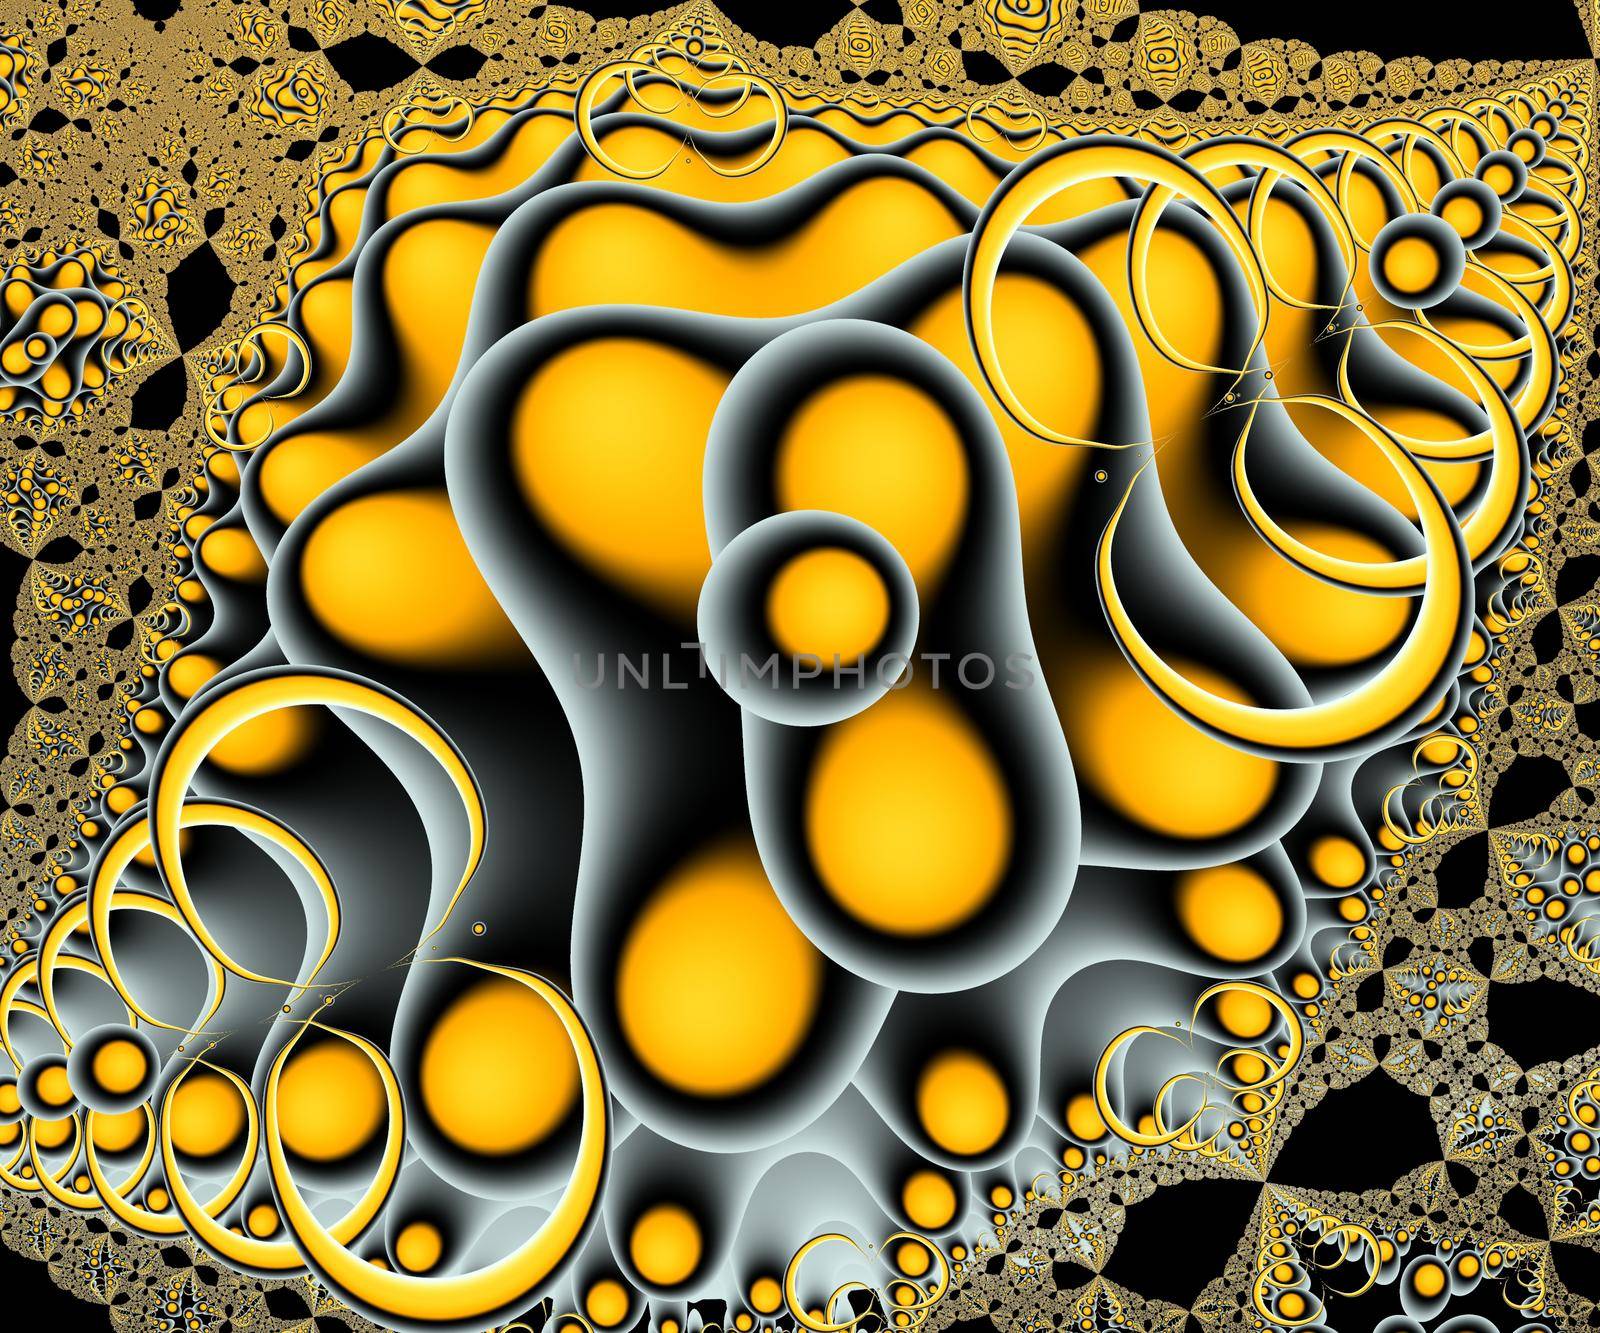 Computer generated abstract colorful fractal artwork for creative design, art, home decoration and entertainment